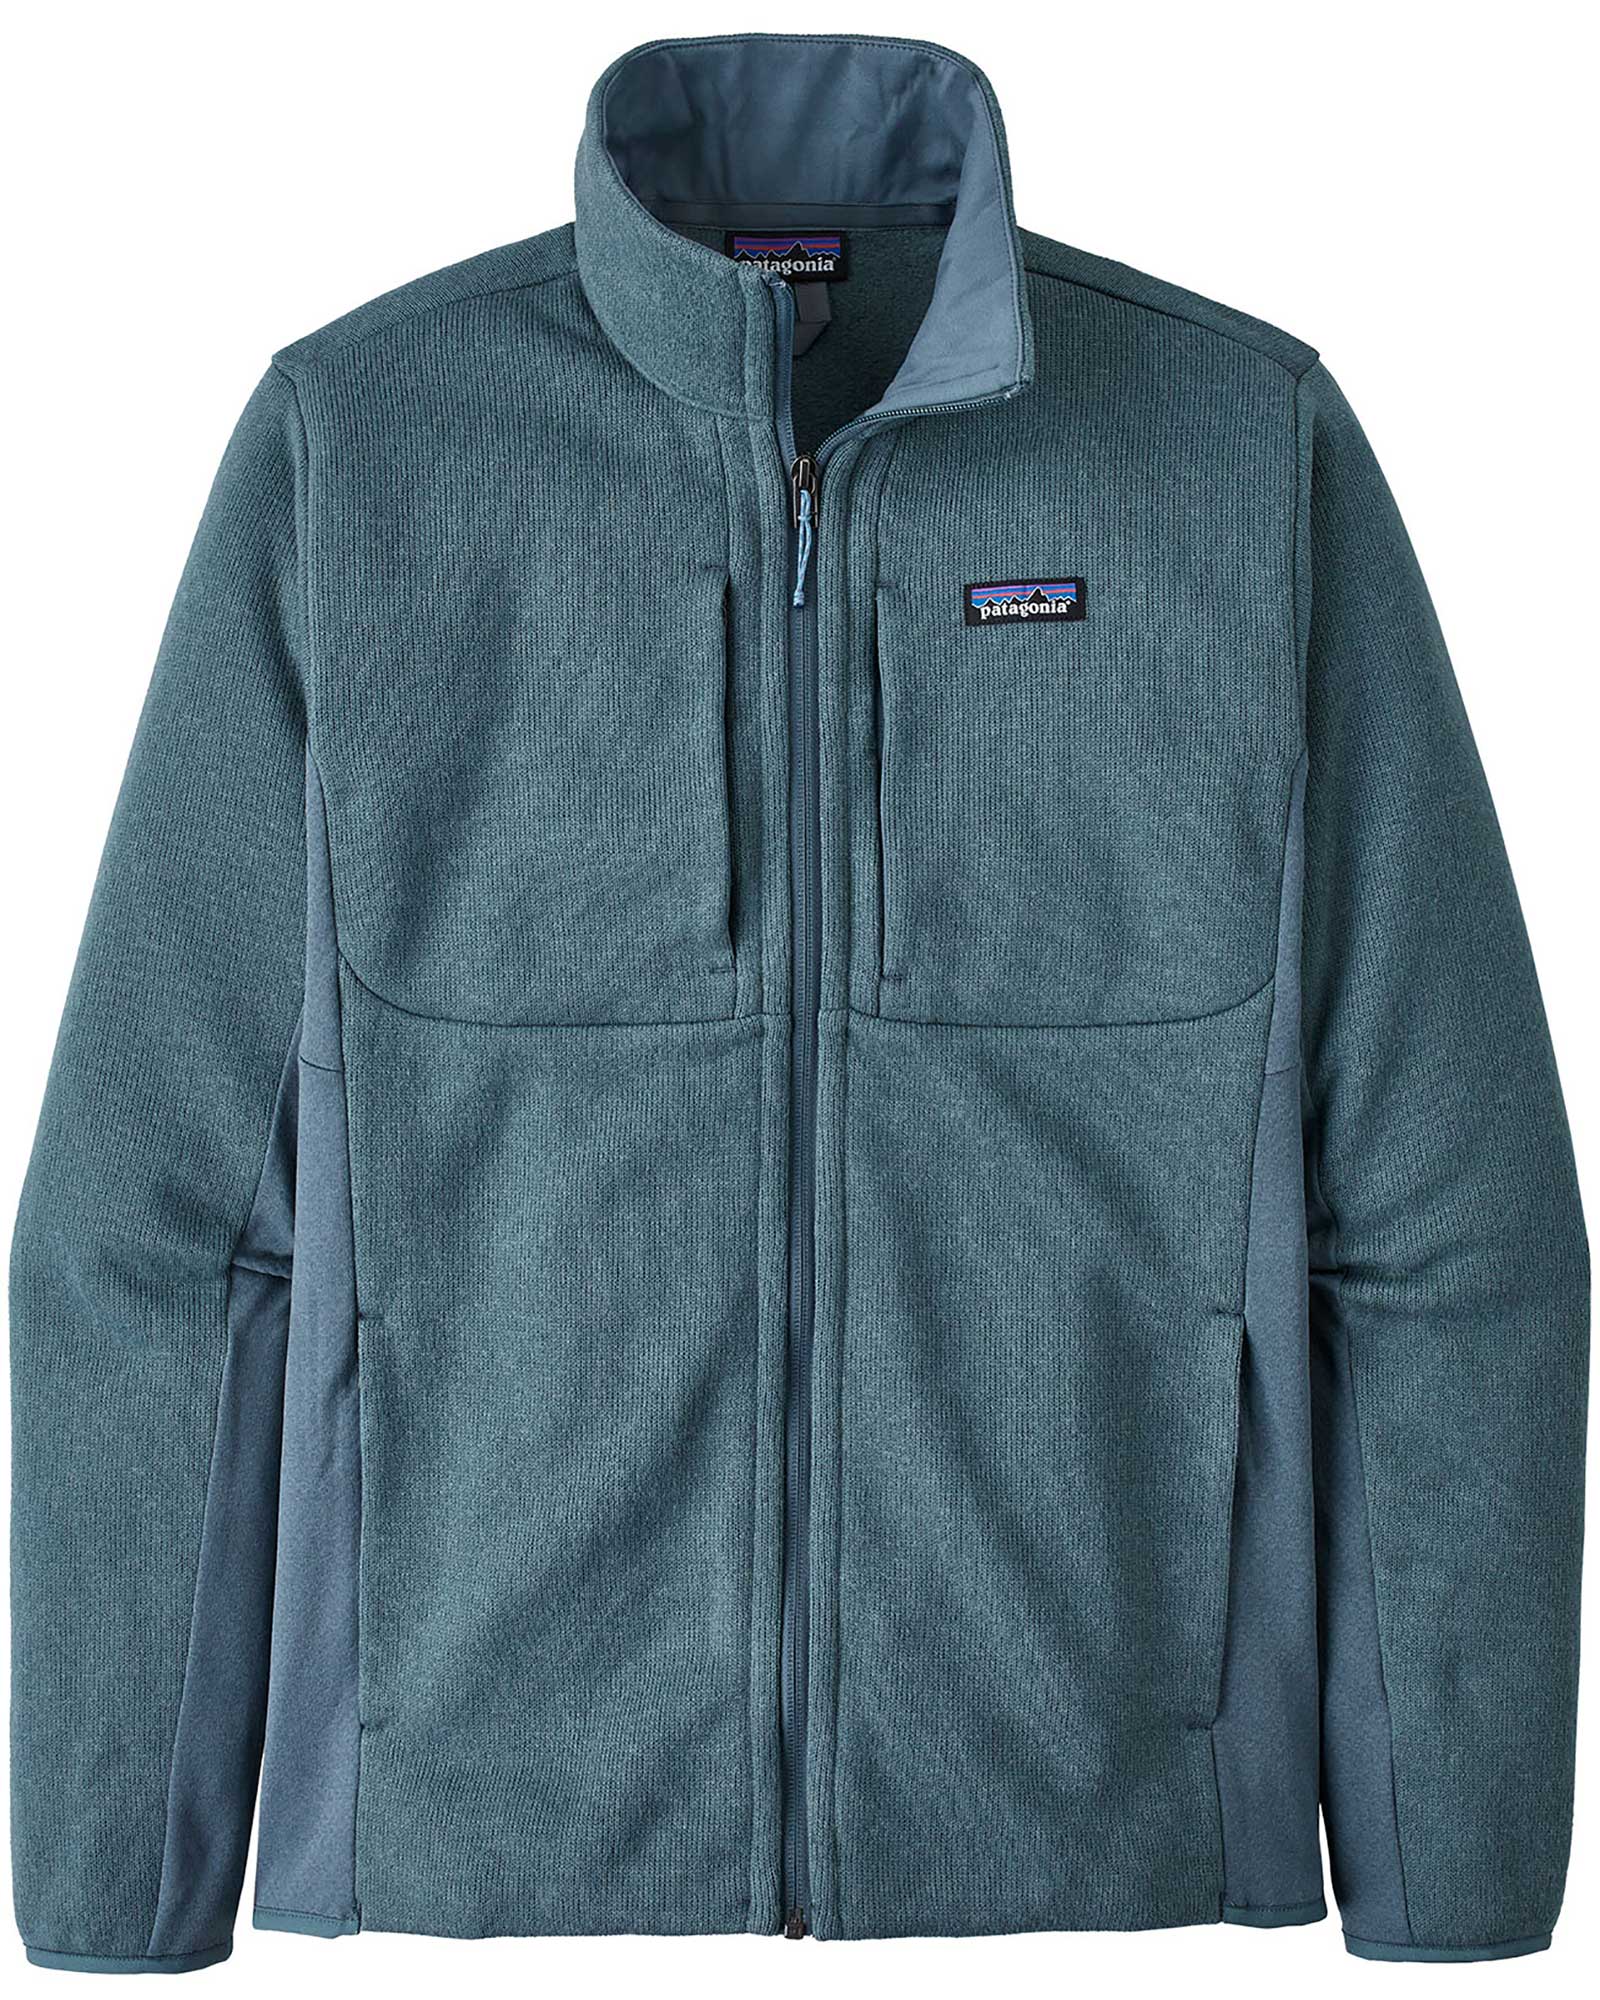 Patagonia Lwt Better Sweater Mens Jacket